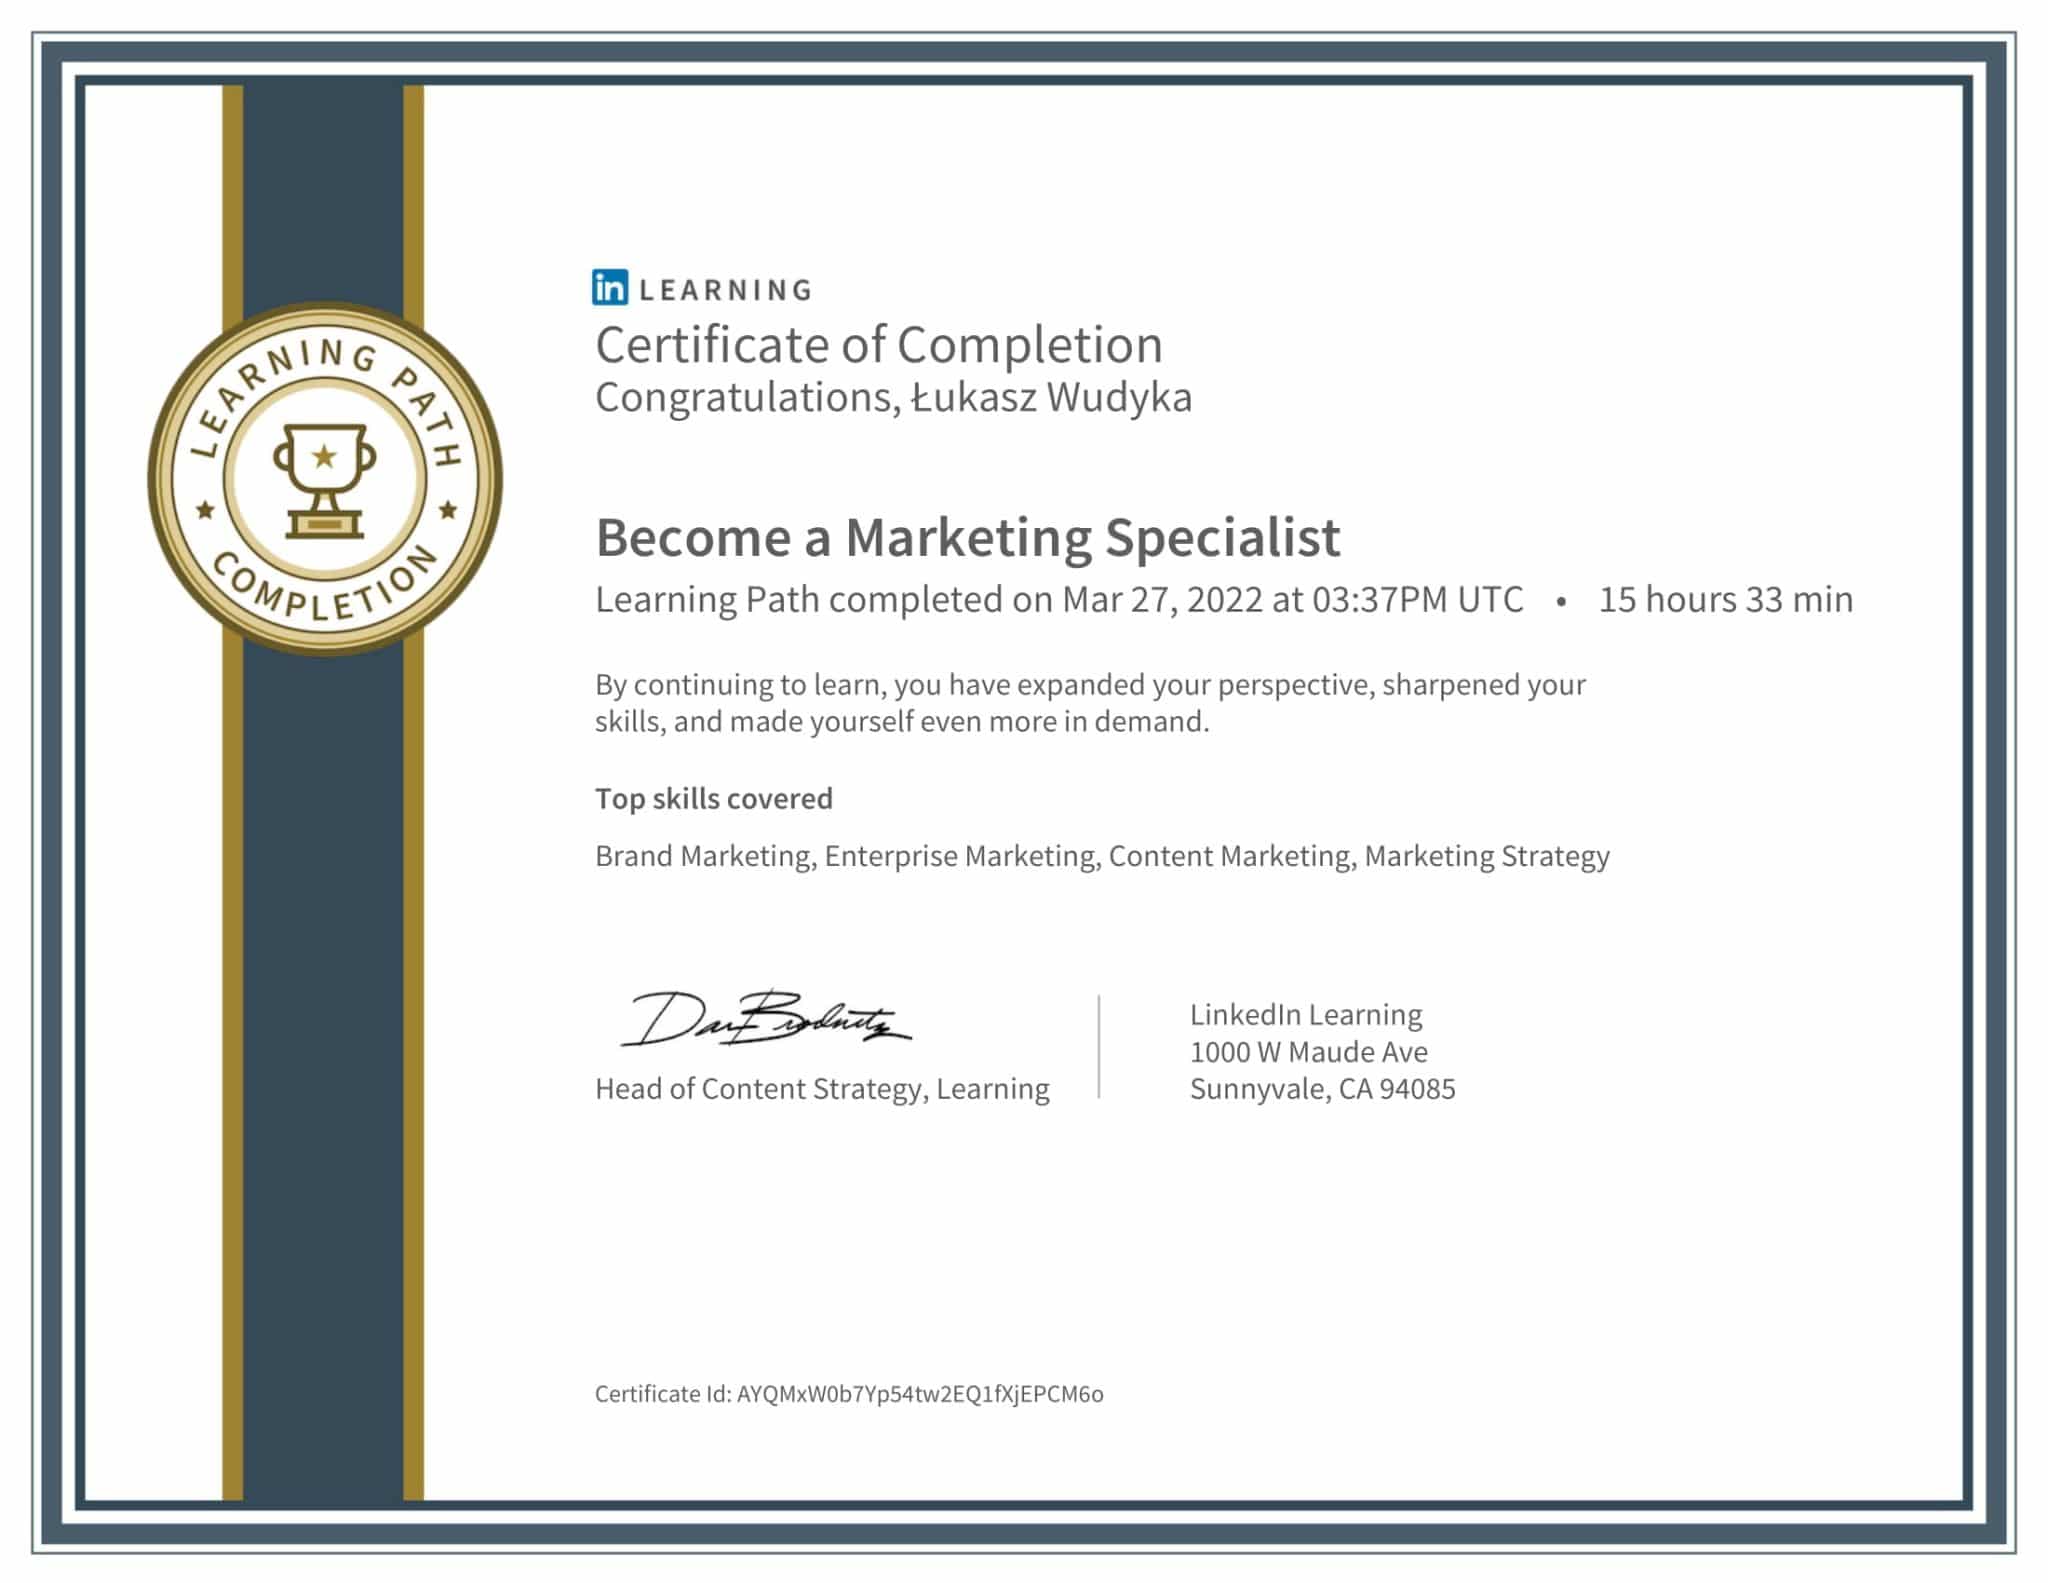 CertificateOfCompletion_Become a Marketing Specialist-1